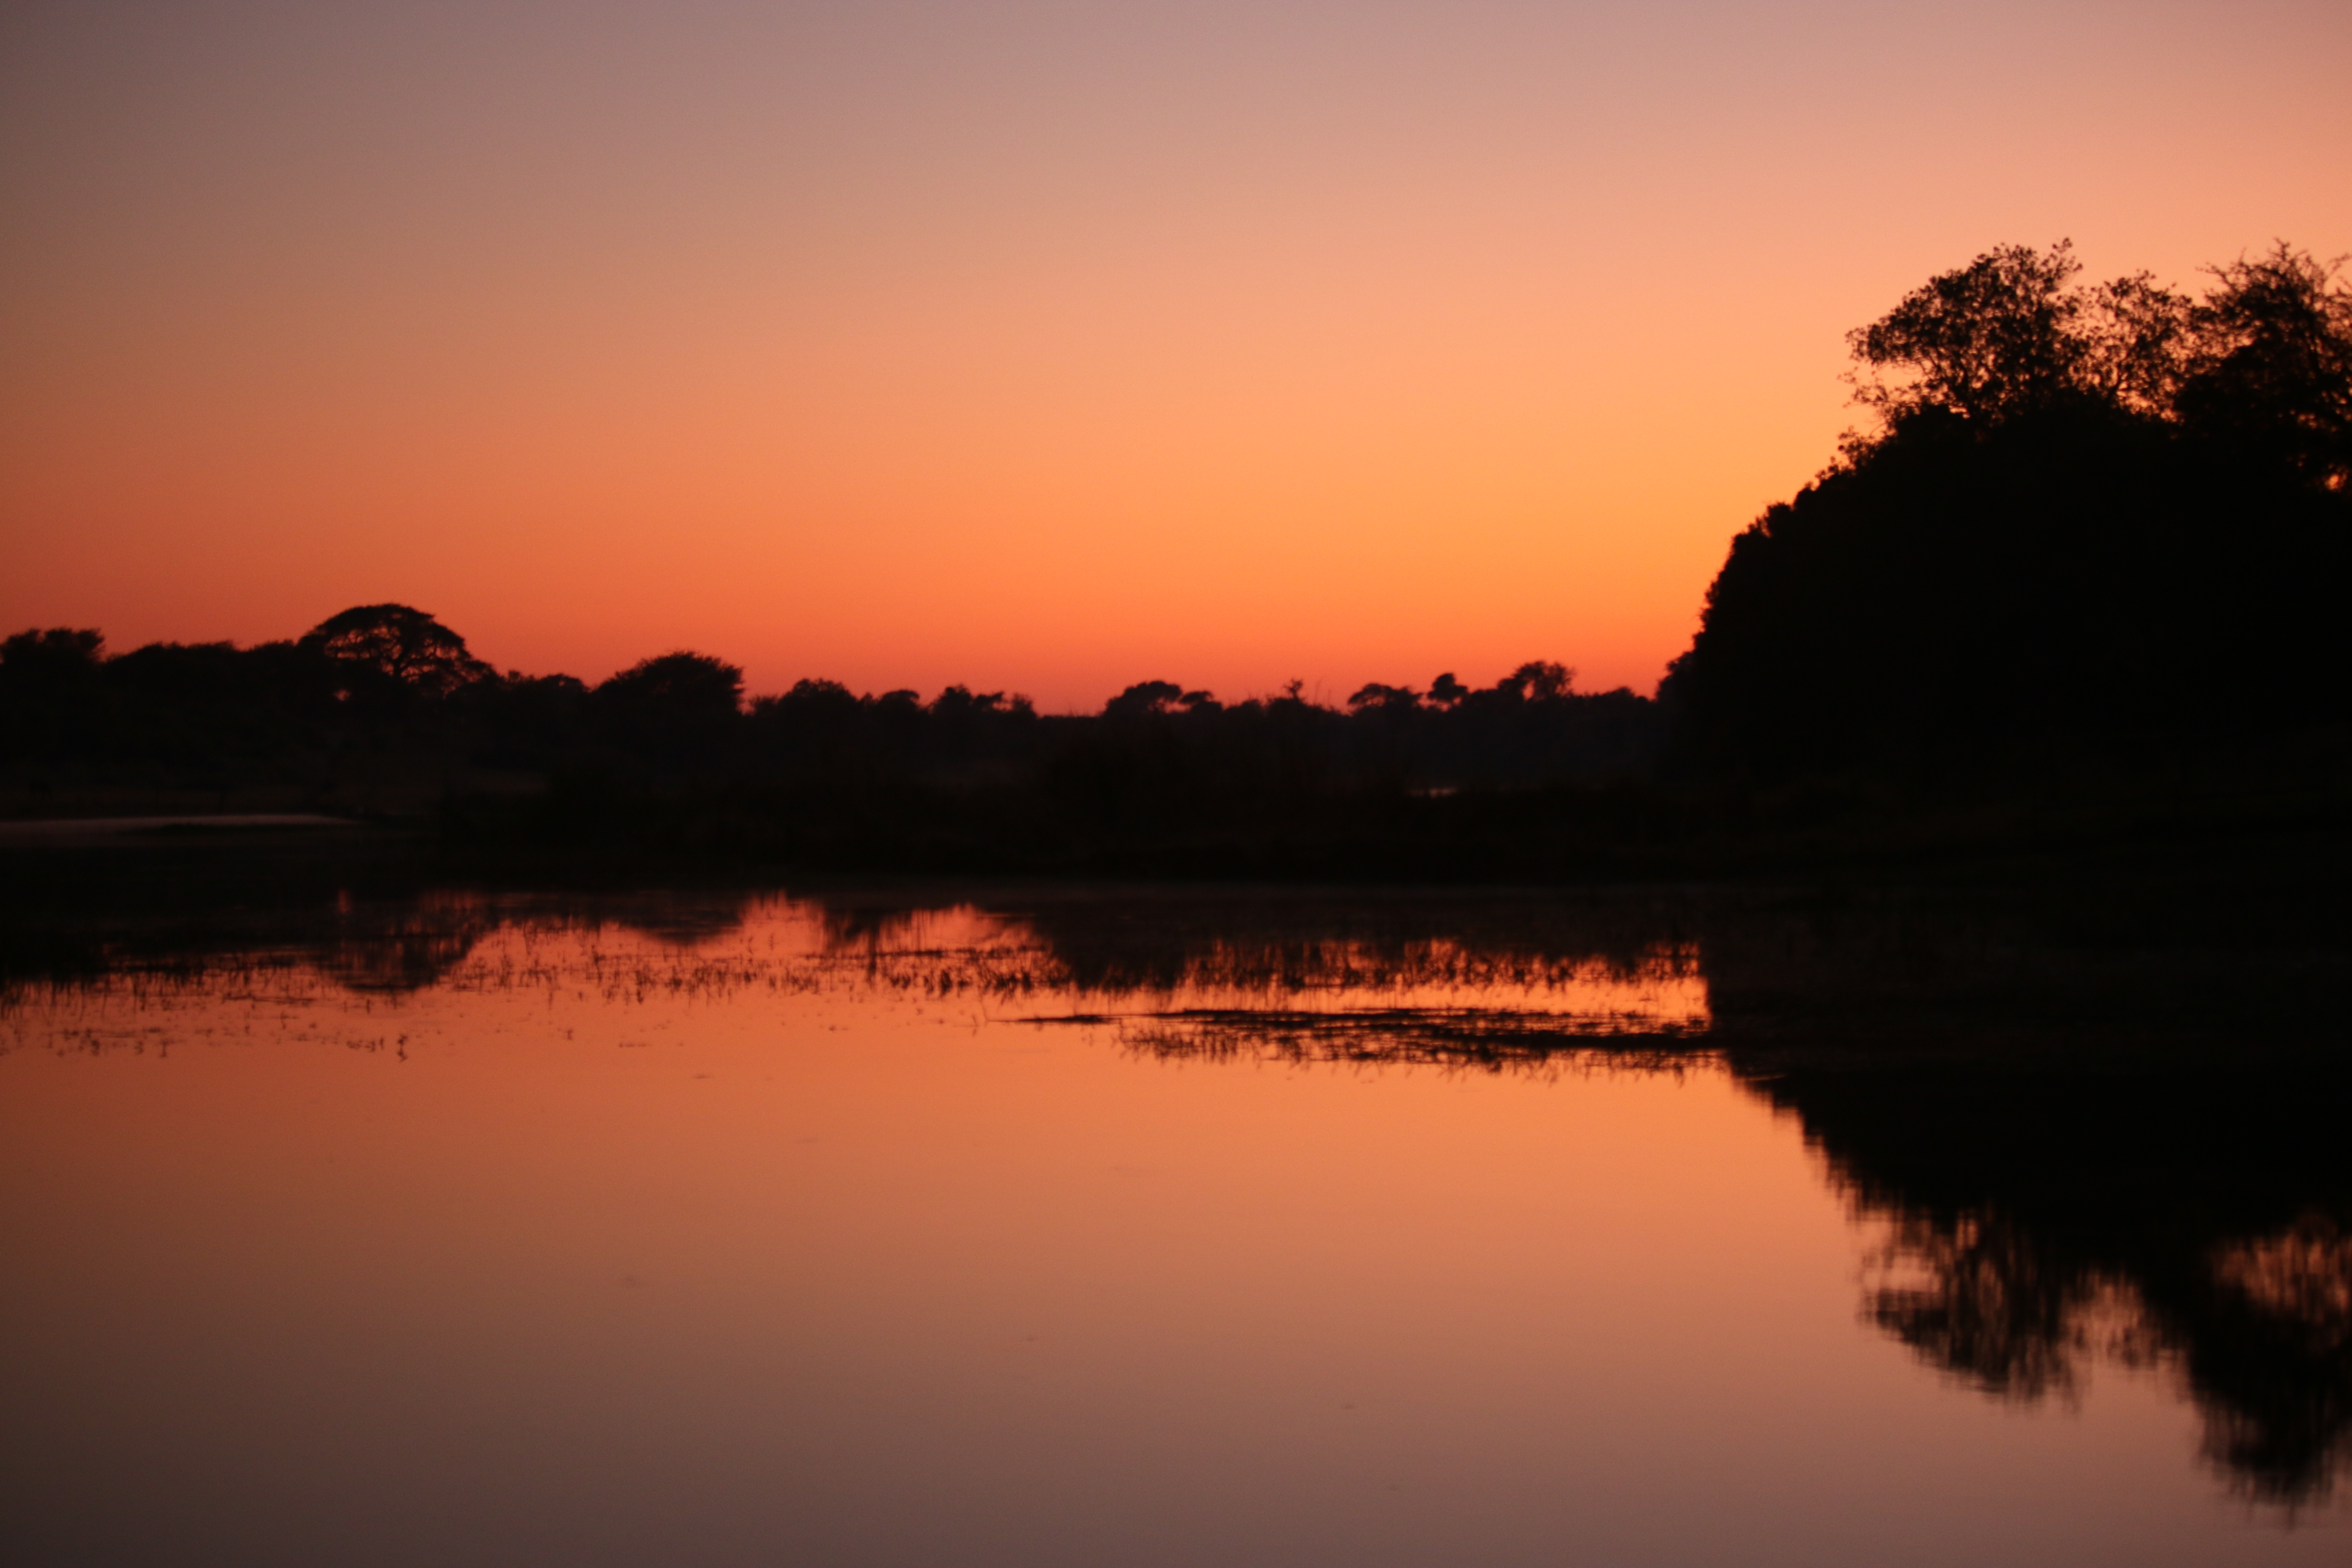 Colors typically seen at sunset. This is the breaking of dawn over the Boteti river.